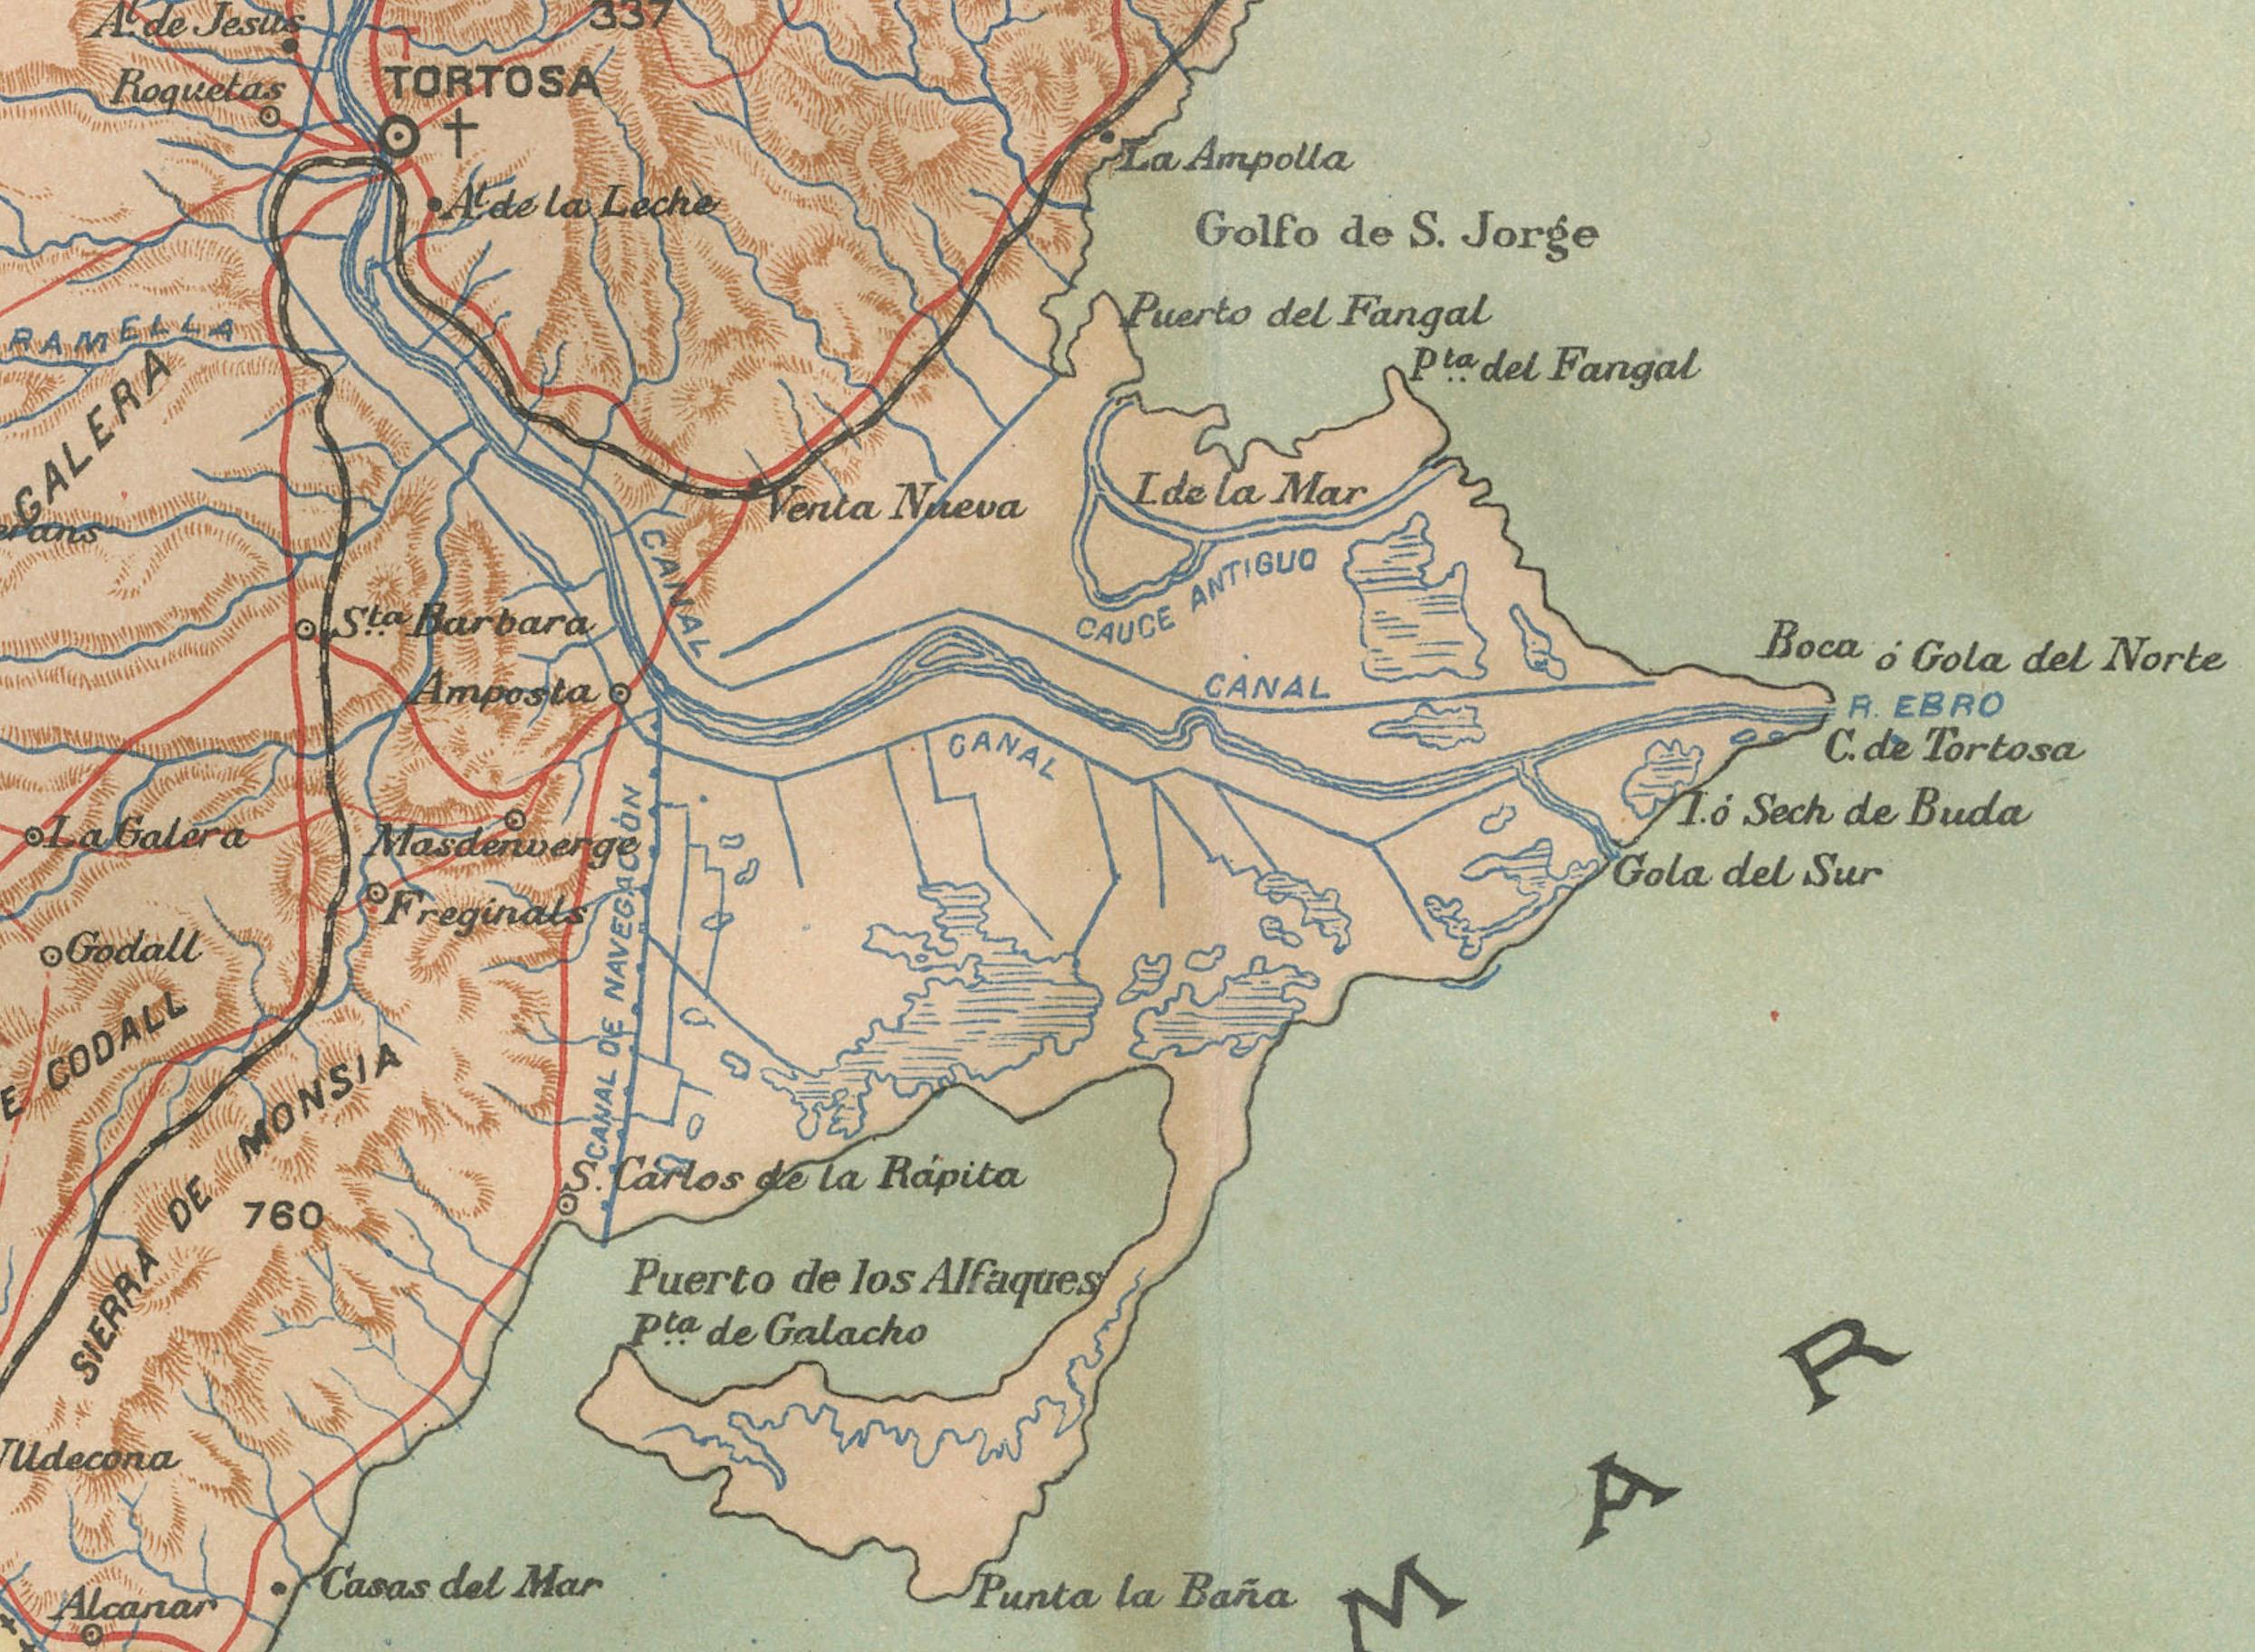 This image depicts a historical map of the province of Tarragona, which is in the northeastern part of Spain, within the autonomous community of Catalonia. The map is dated 1901, suggesting that it is over a century old and would have been created